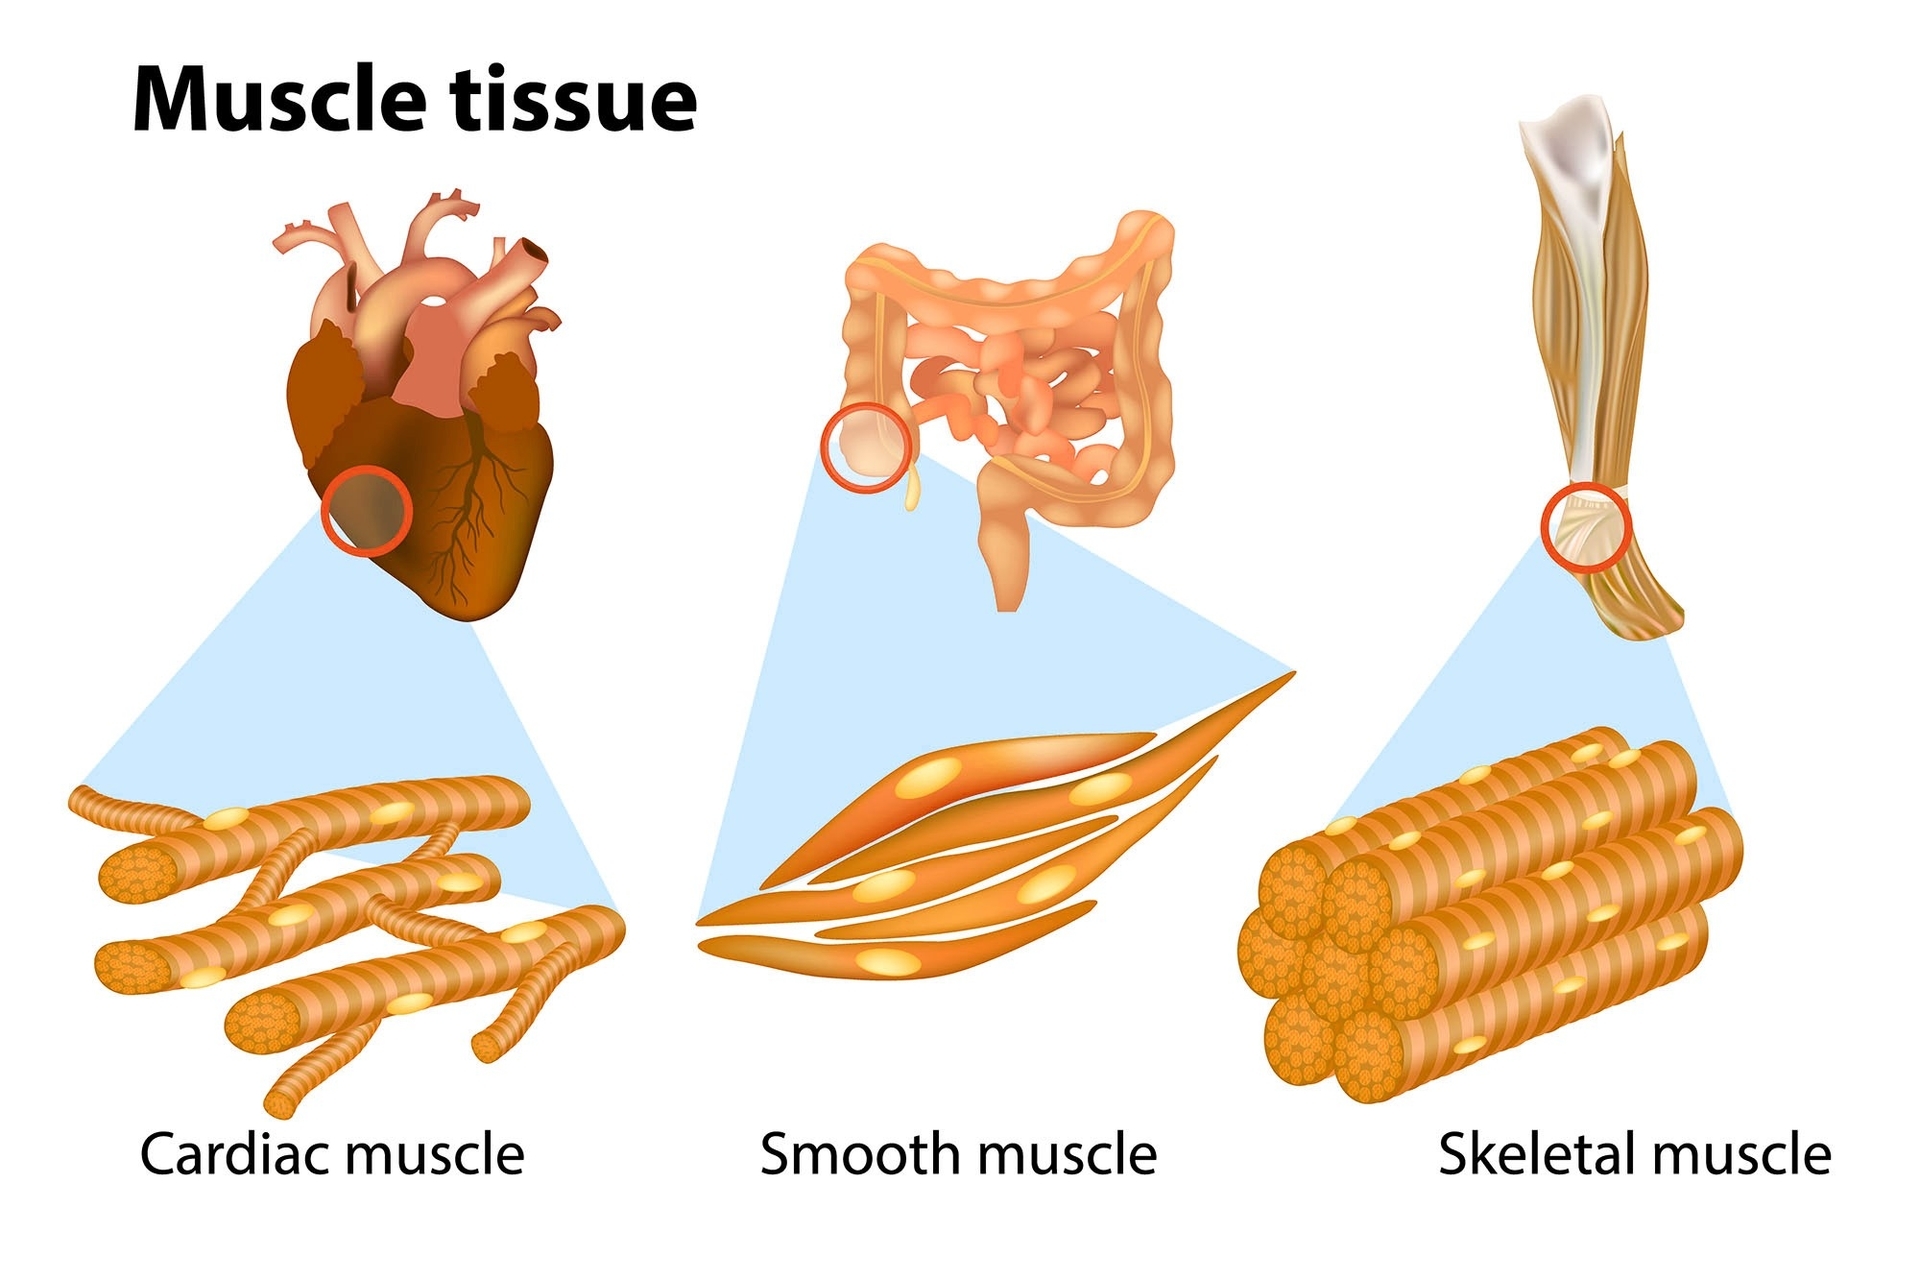 Types Of Muscle Tissue In Human Body Explained